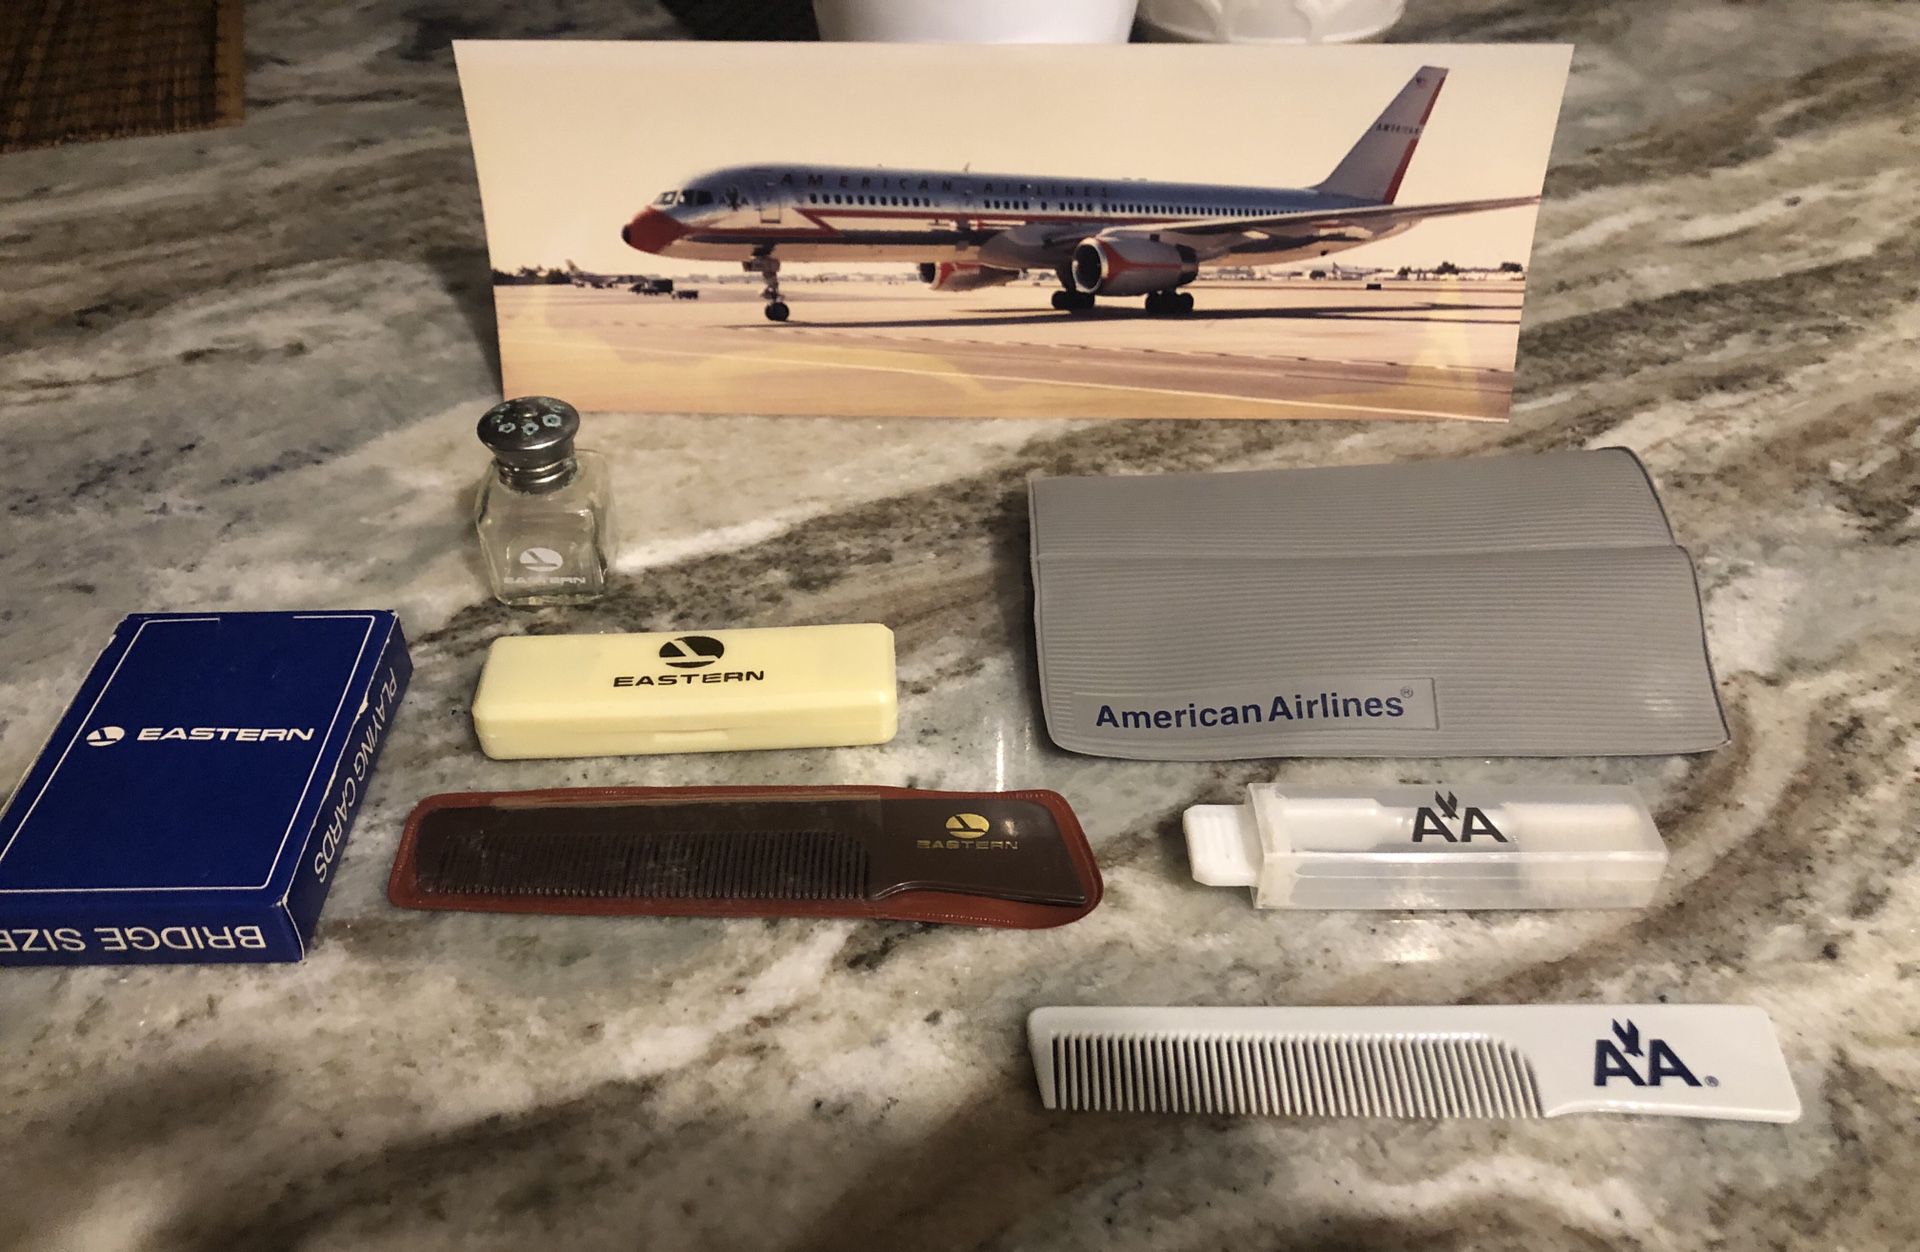 Airline enthusiast’s “junk” collection